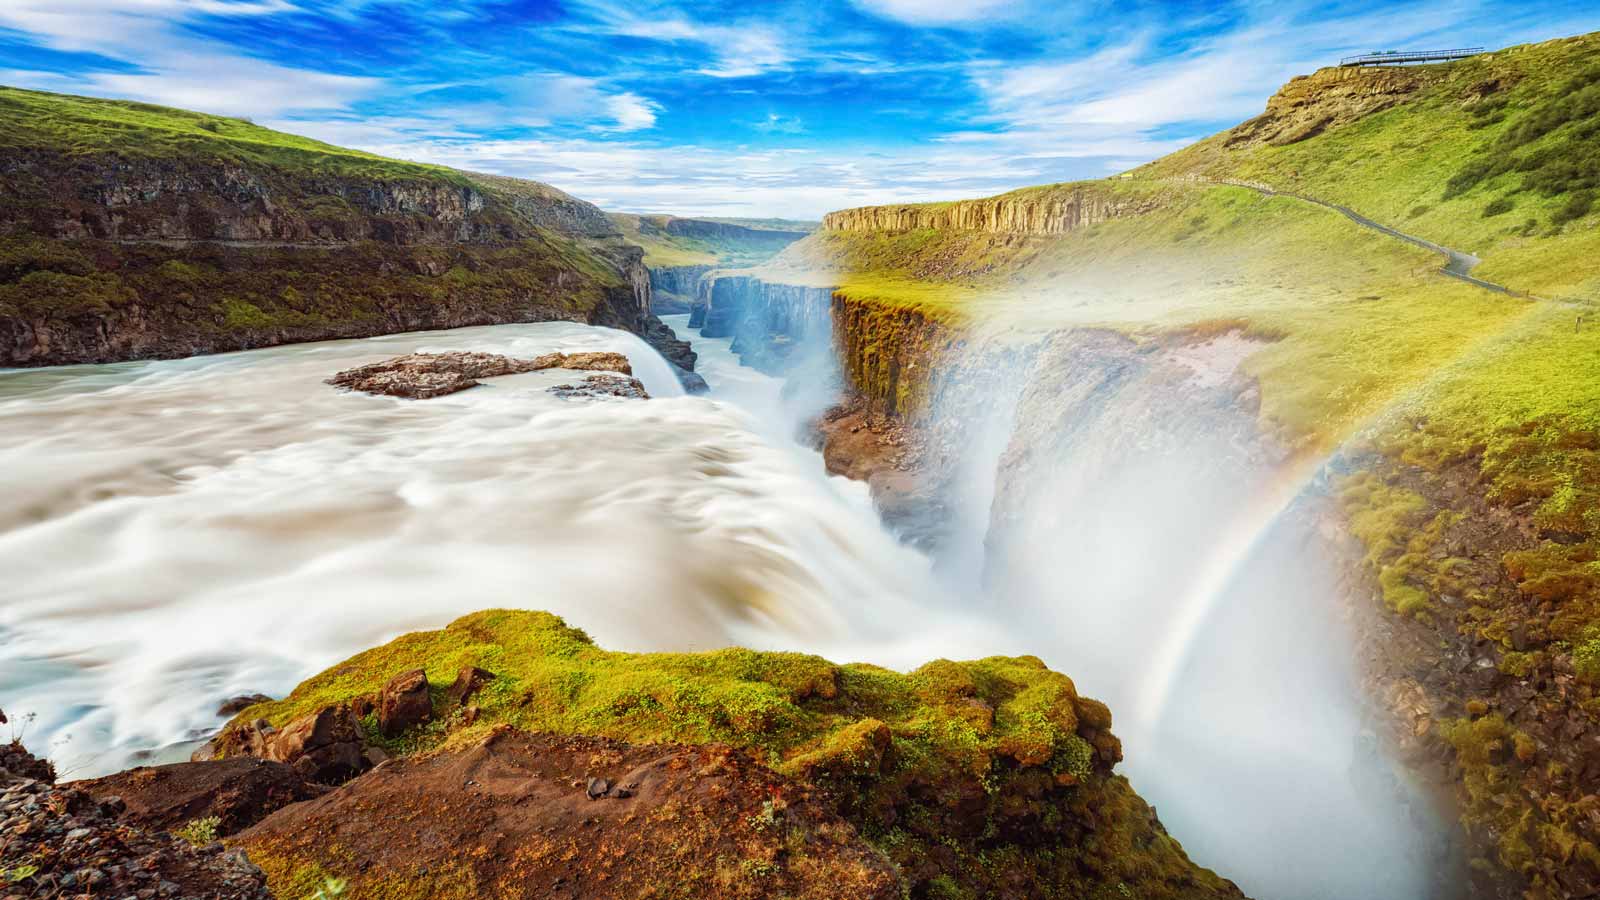 <p><span>Gullfoss, meaning “golden falls,” is located on Iceland’s Hvita River. The waterfall’s name comes from the glacial sediment that makes the water glow gold in the sunlight. </span></p><p><span>The 105-foot-tall falls cascade in two stages at nearly right angles, creating an illusion that the golden waters stretch to the ends of the Earth. Gullfoss is a truly magical sight against Iceland’s lush, green landscape.</span></p>